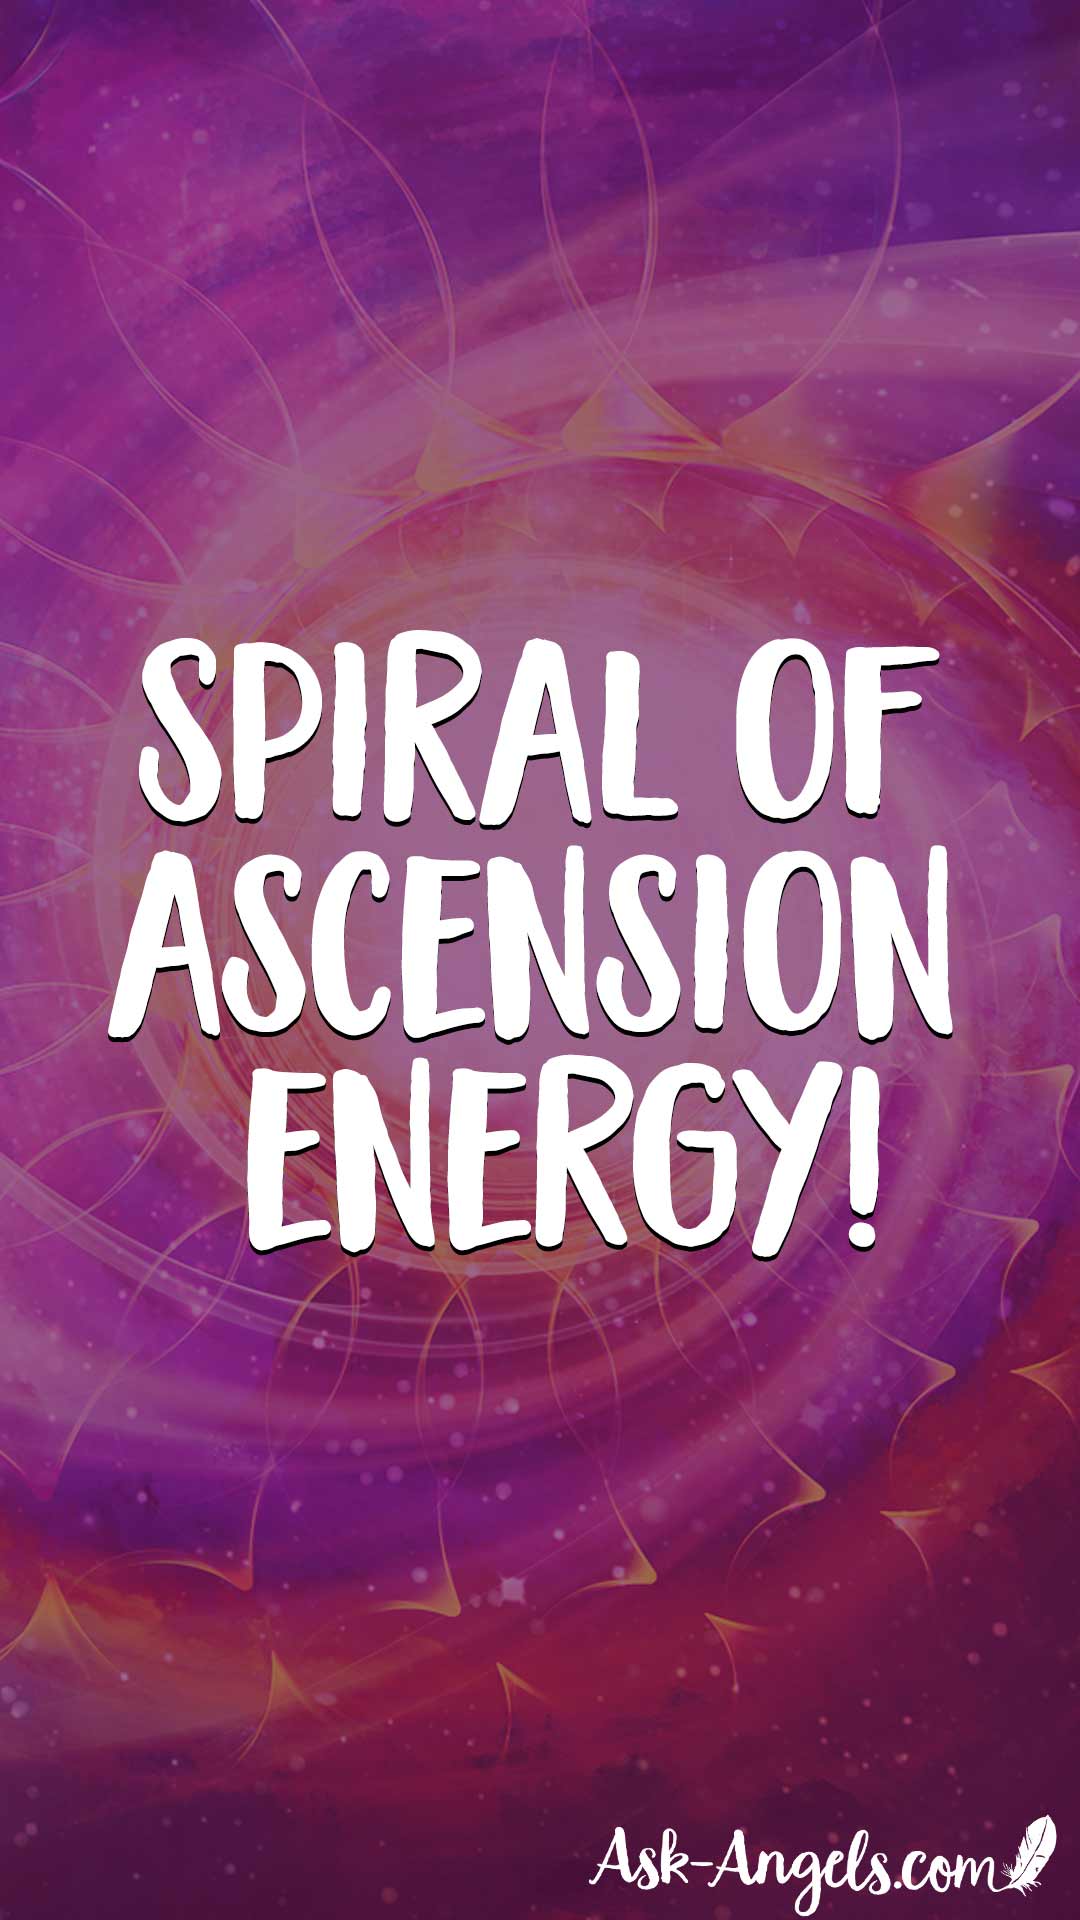 Spiral of Ascension Energy, channeling with the Council of Light